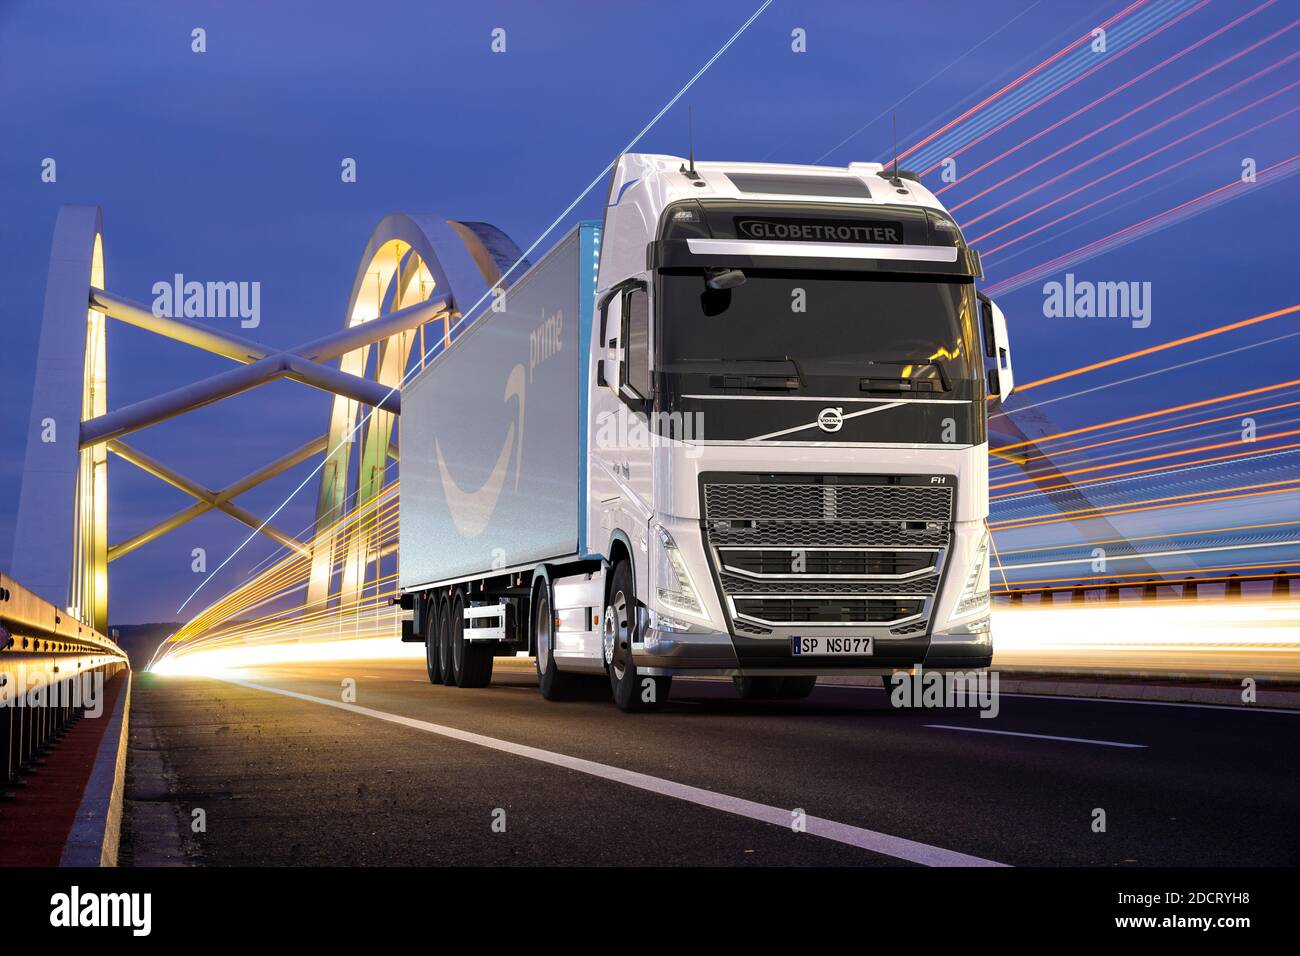 Volvo truck with Amazon Prime logo trailer on the road Stock Photo - Alamy